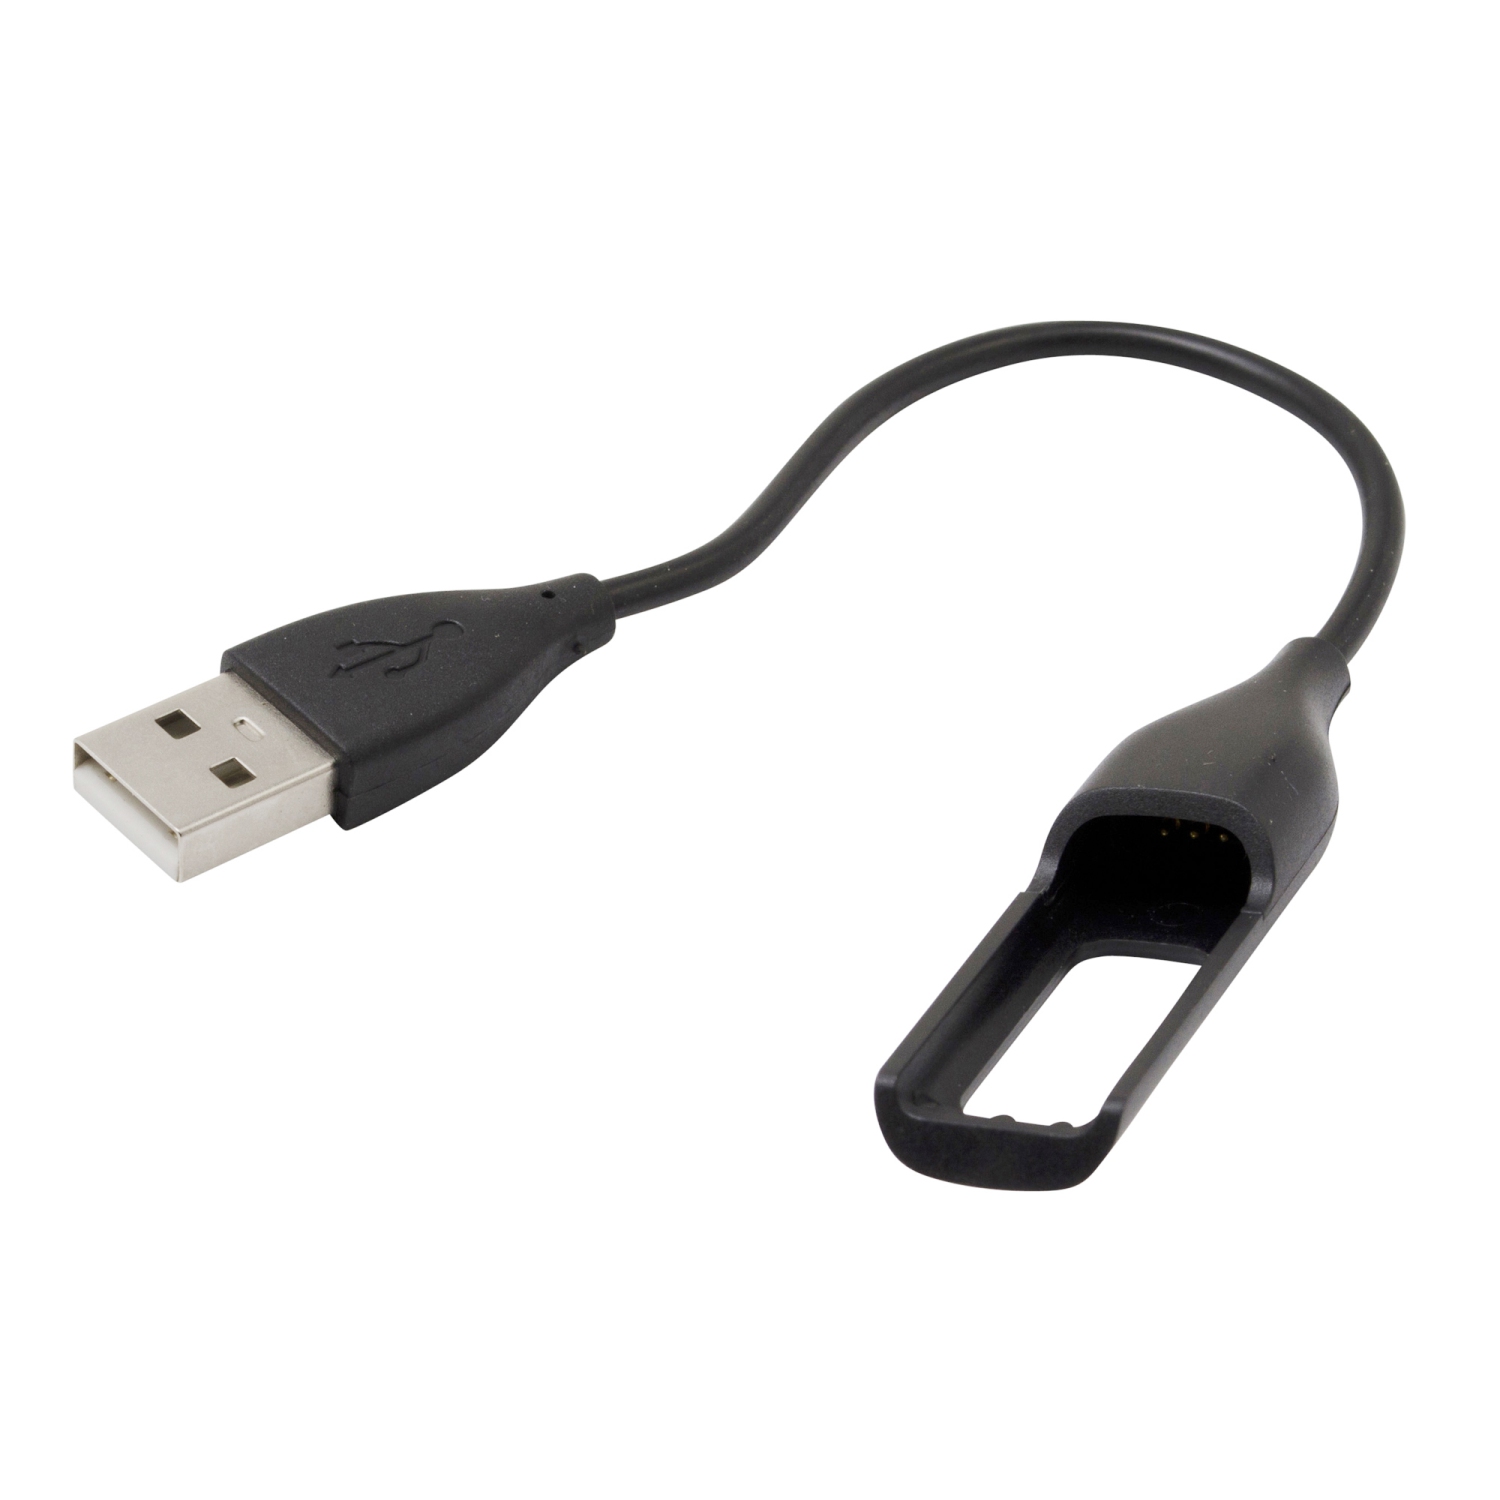 Replacement USB Charging Cable for Fitbit Flex